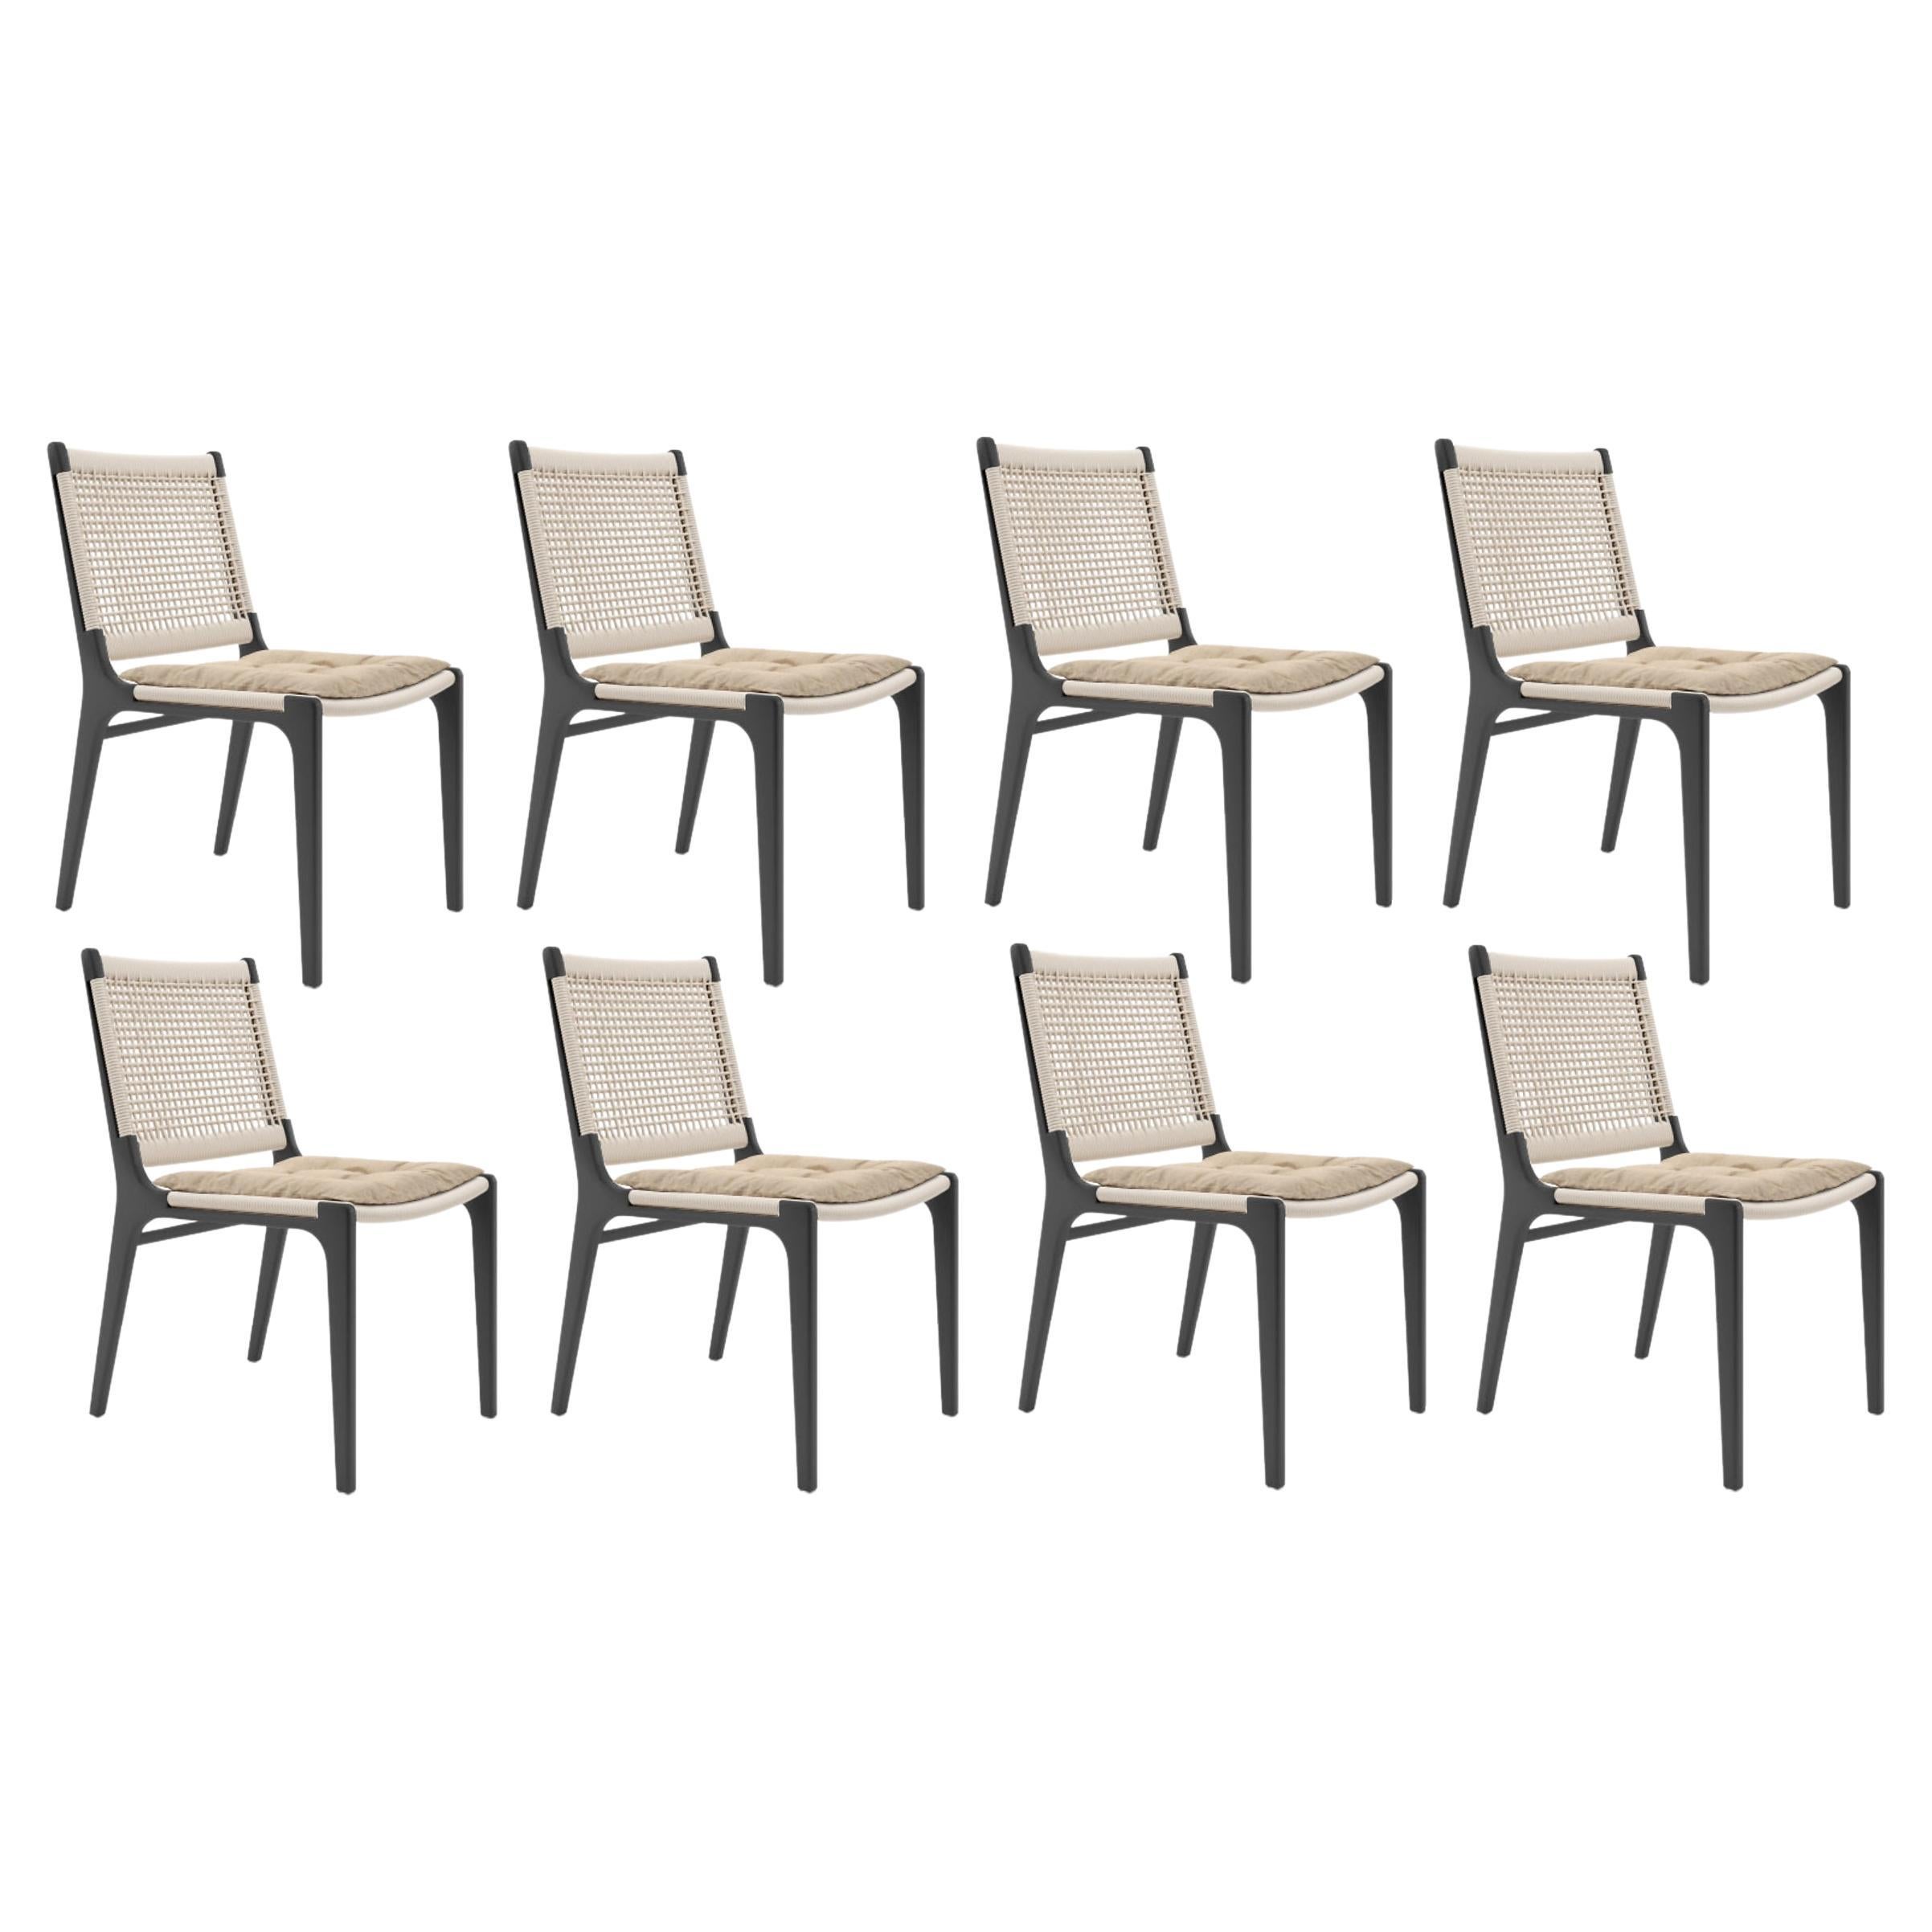 Outdoor Dining Chair With Rope Detailing/Set Of 8